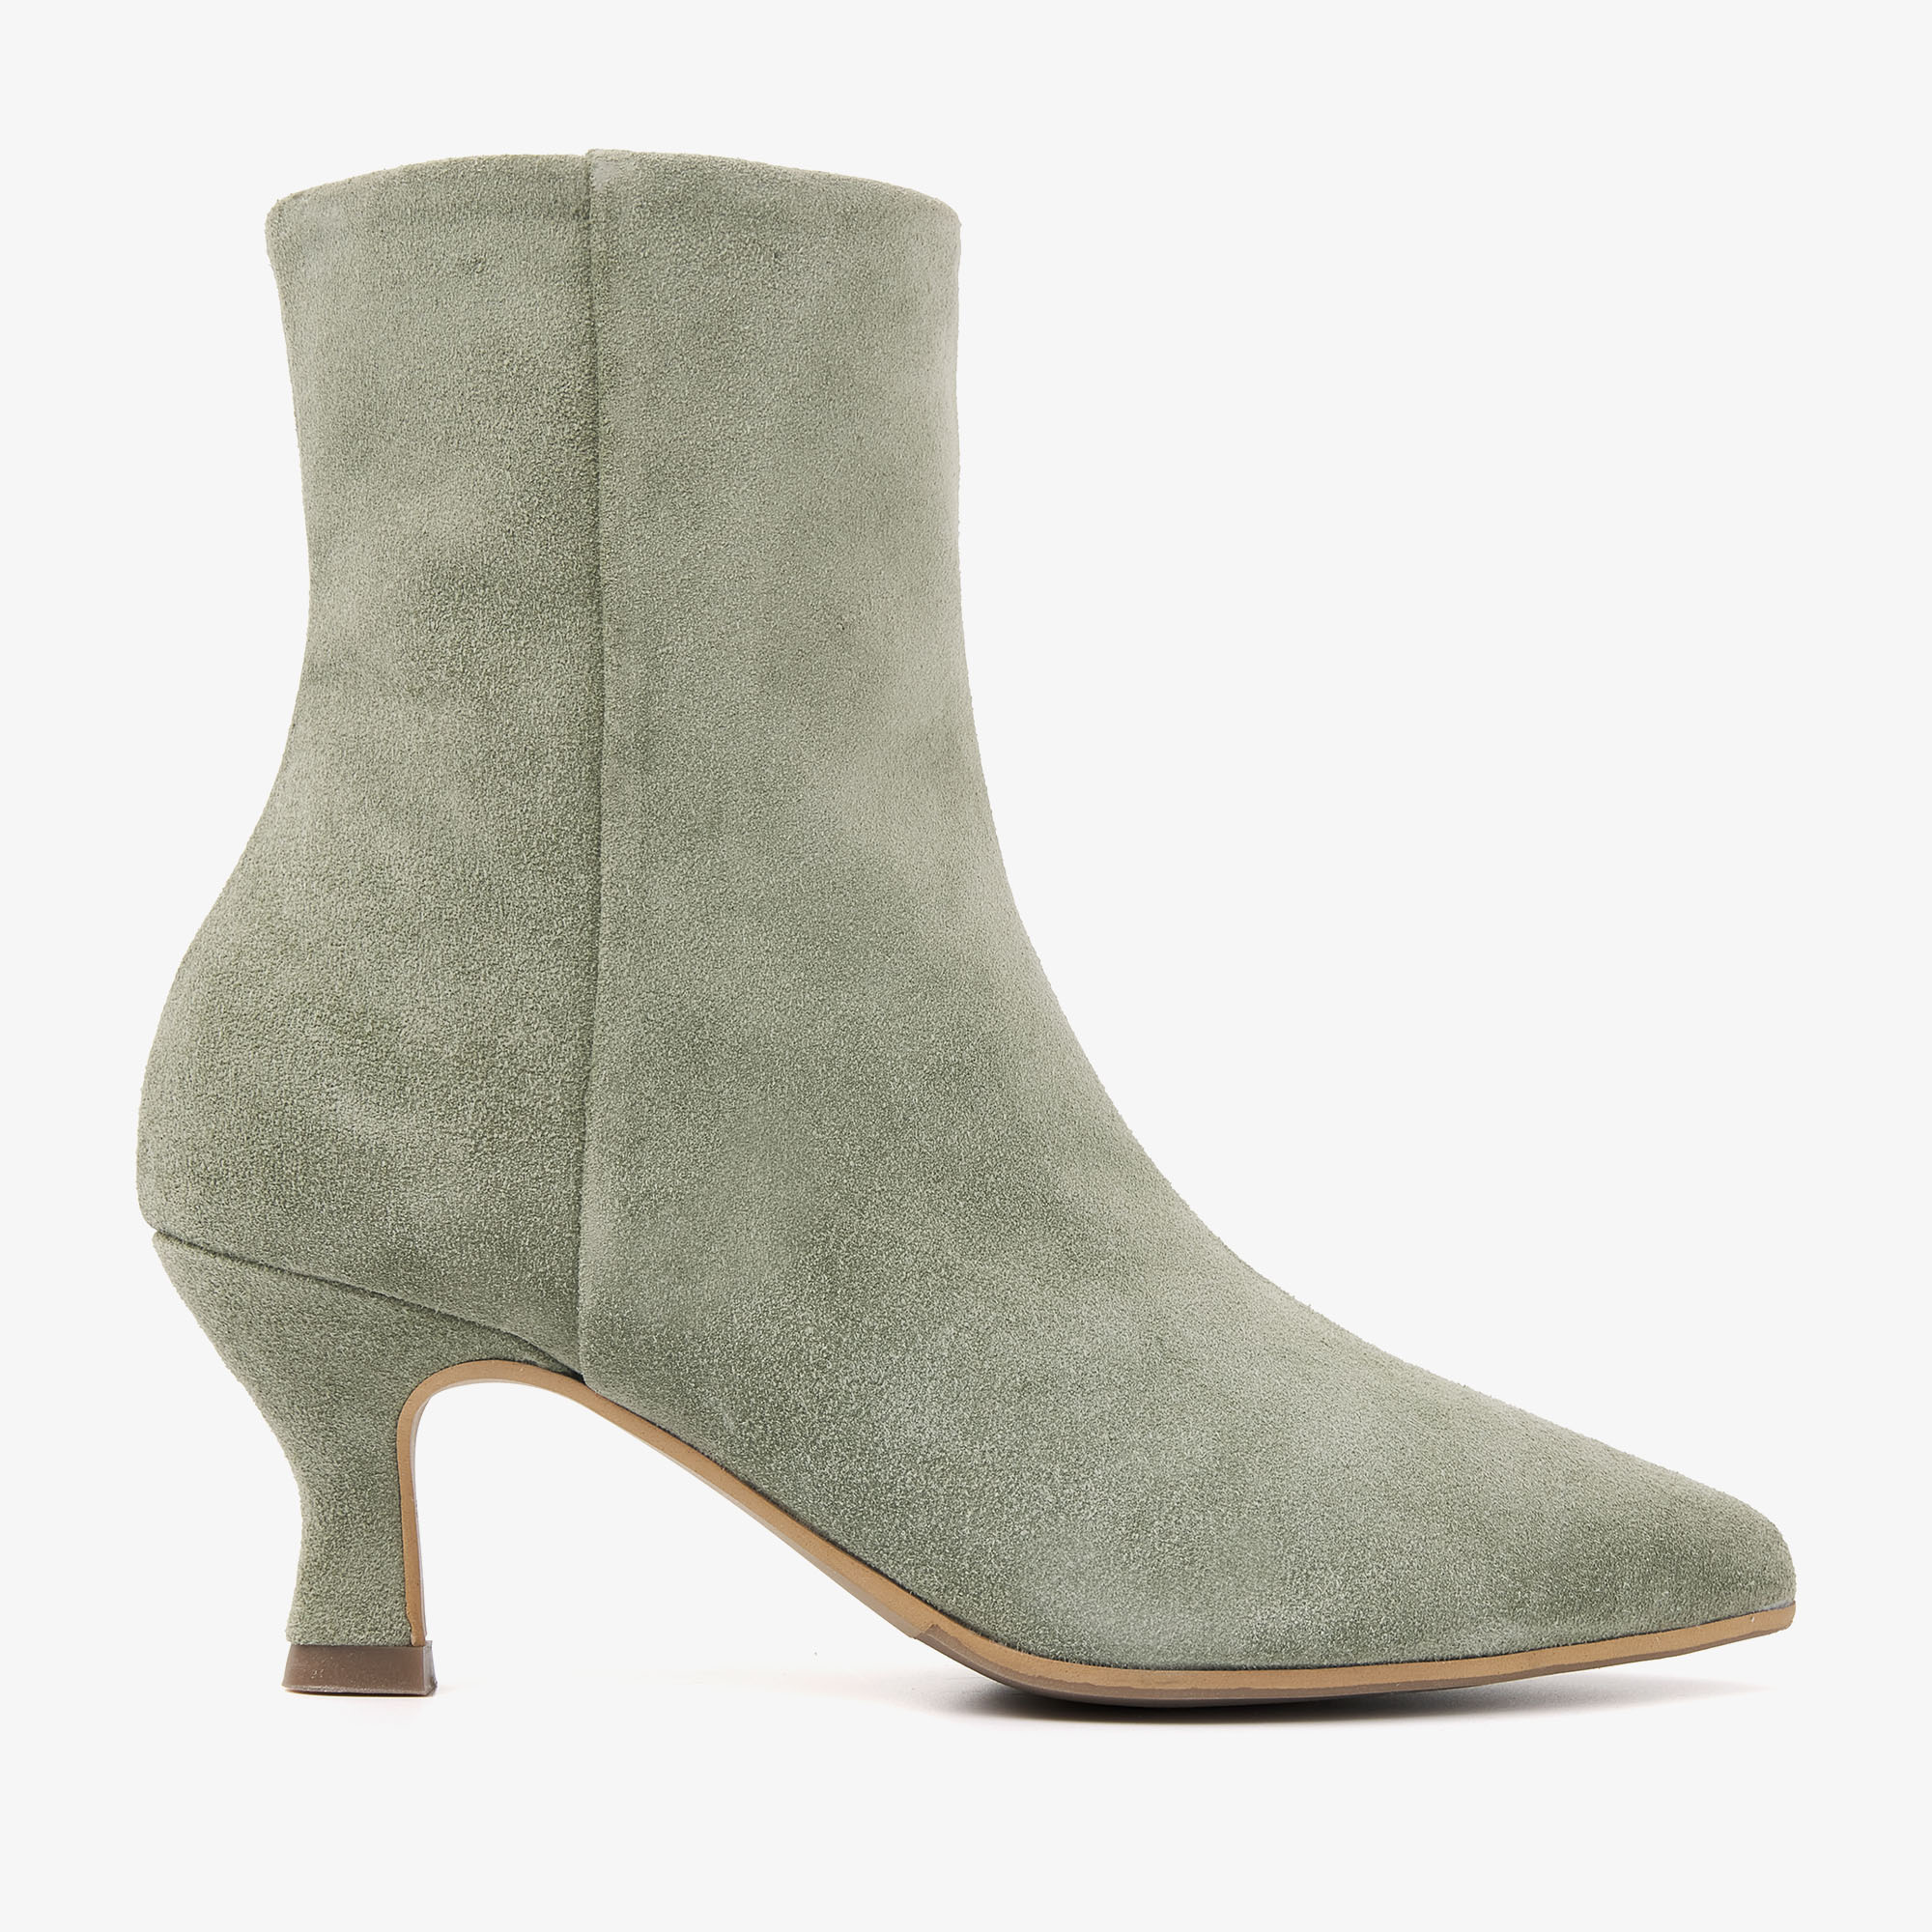 VIA VAI Noelle Rox green ankle boots